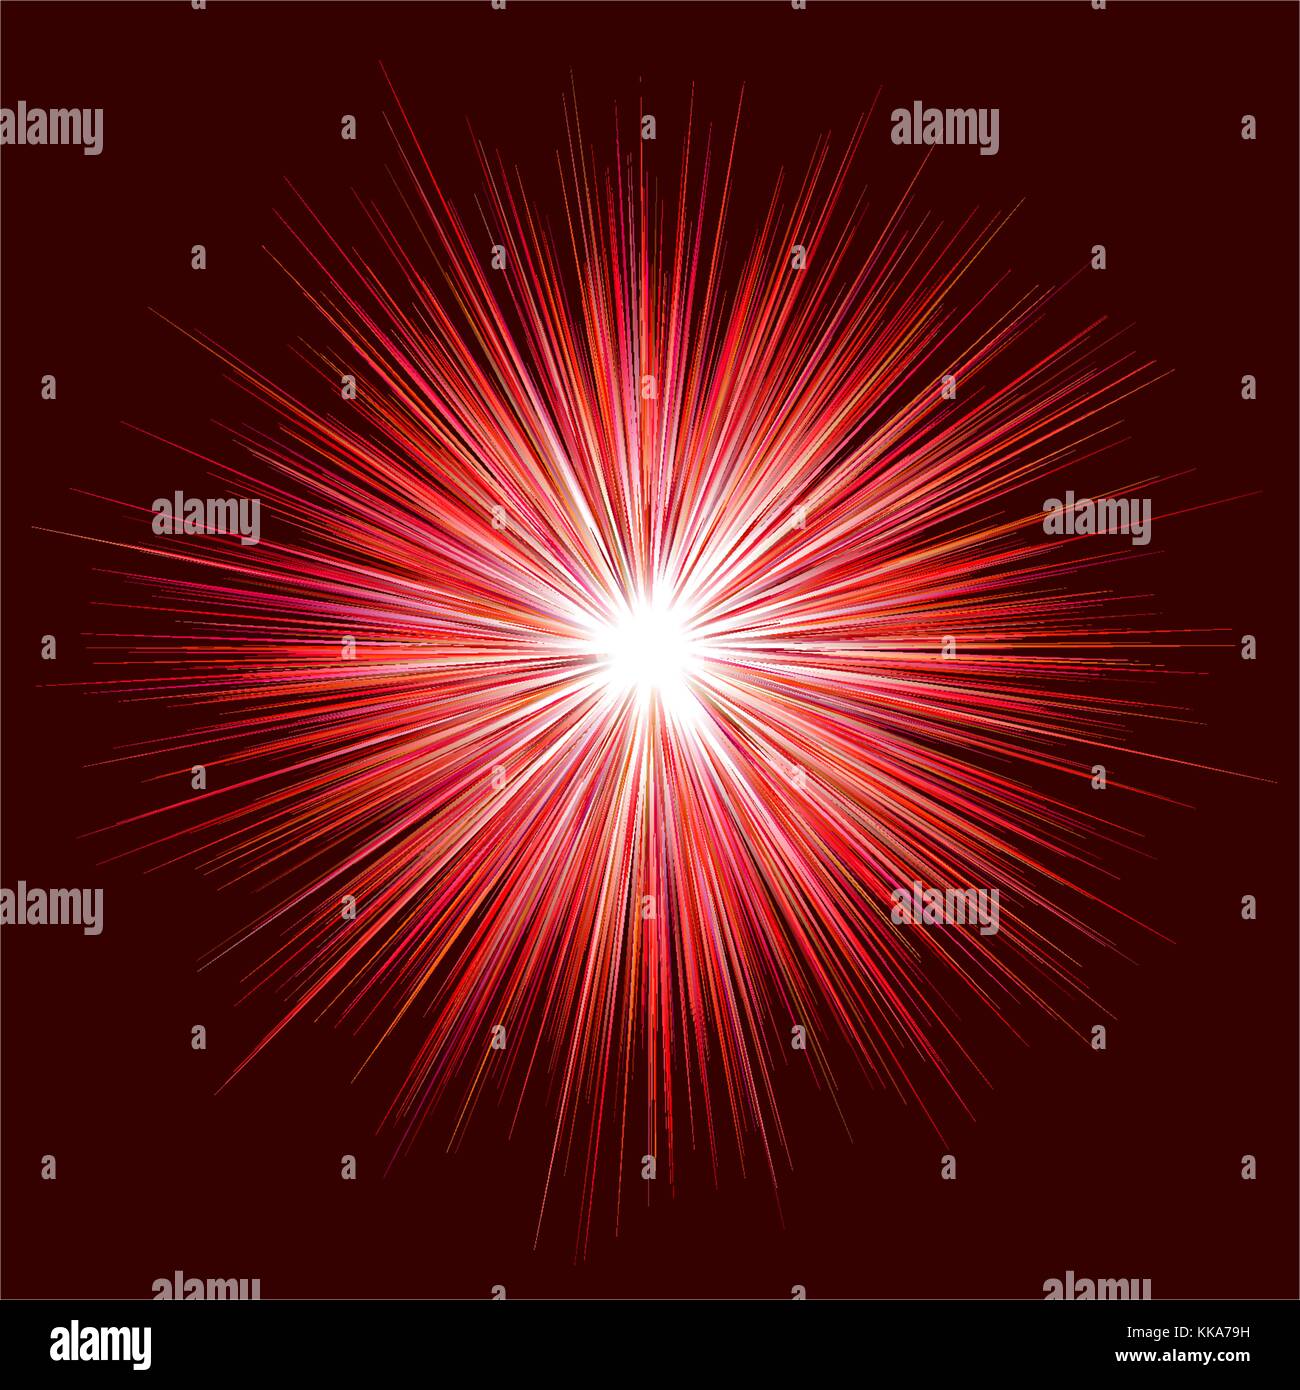 Abstract red explosion design on dark background Stock Vector